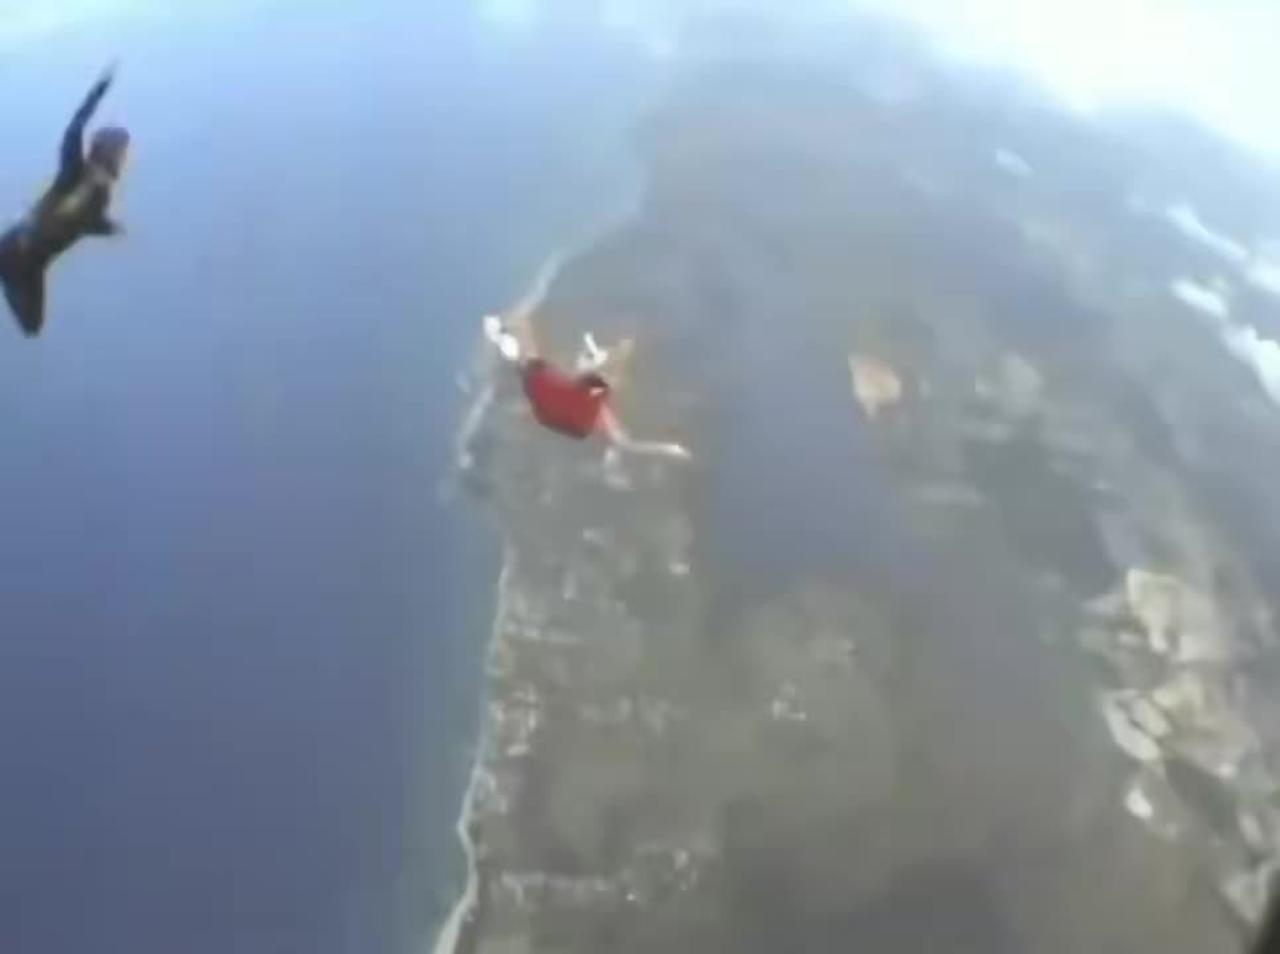 Man jumps from plane with no parachute